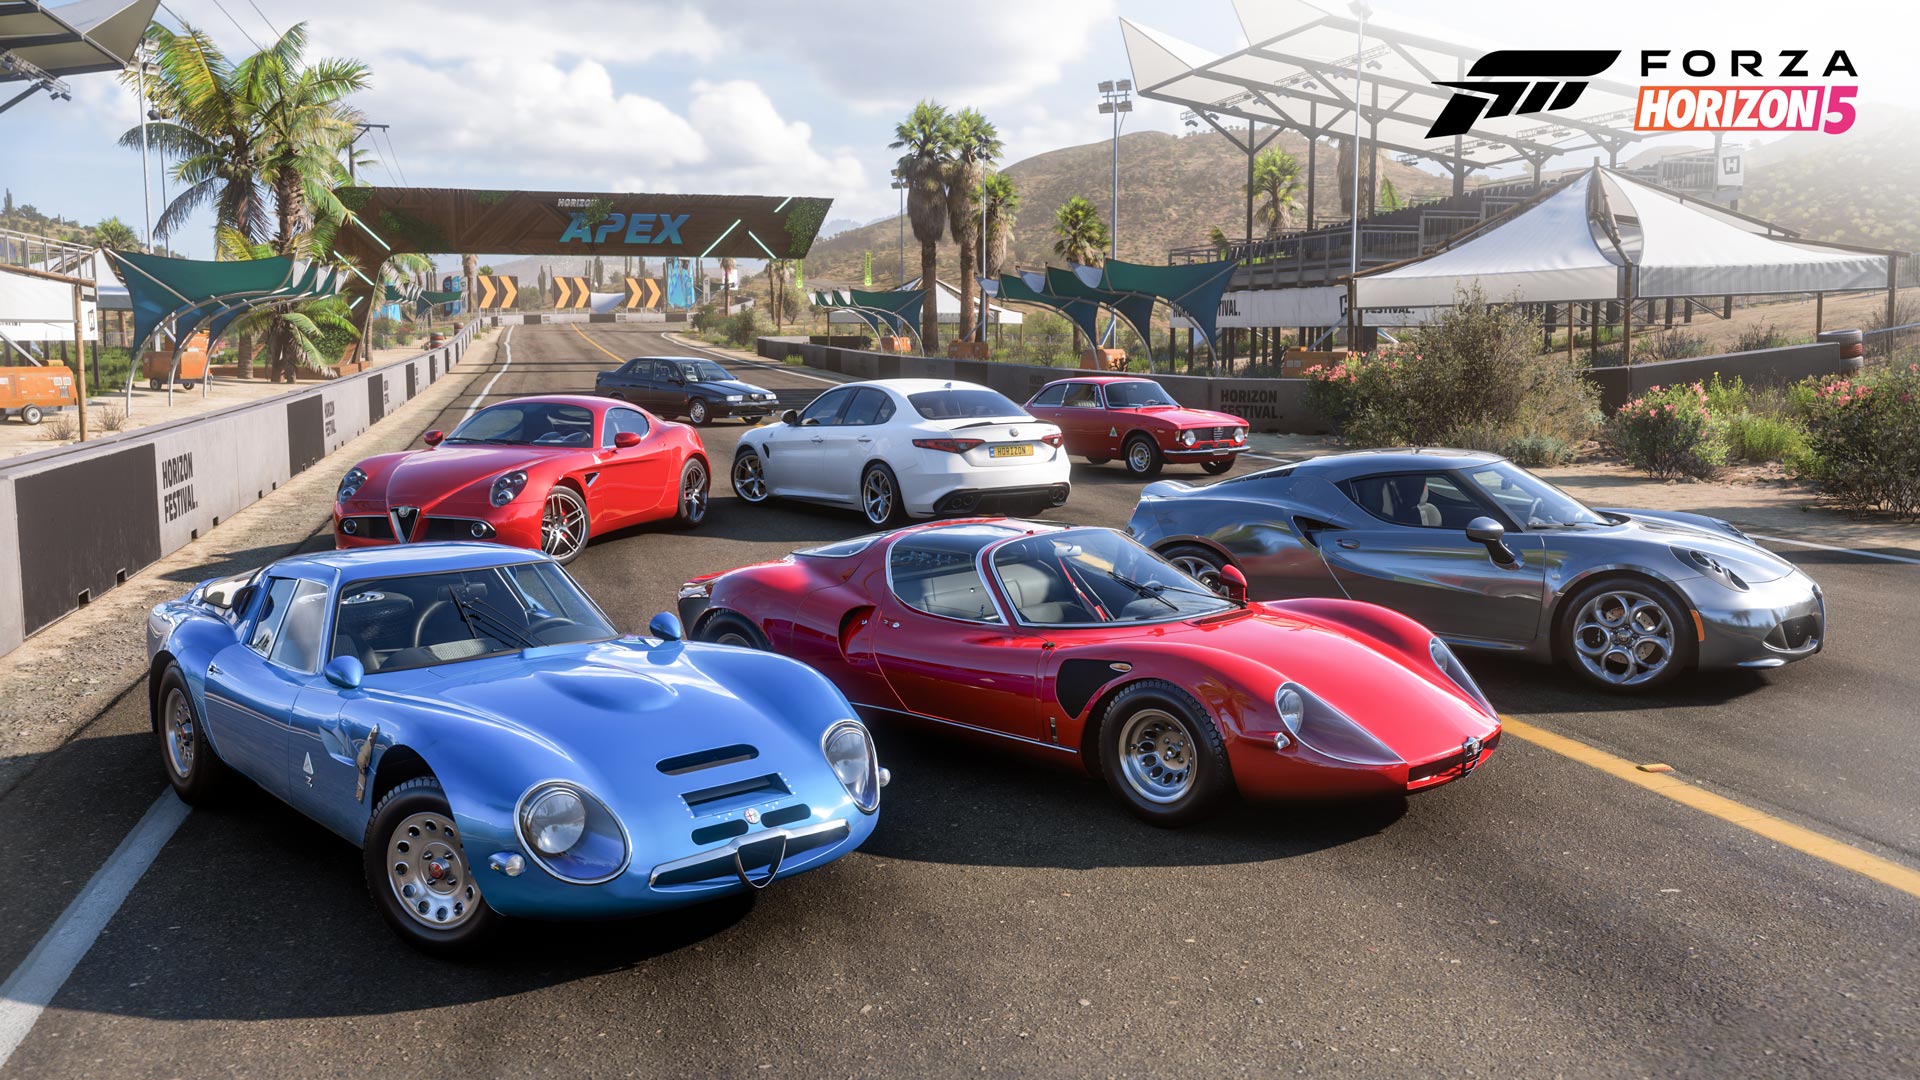 Forza Horizon 5 editions & add-ons: Where to buy, pricing, DLC, car packs,  and more